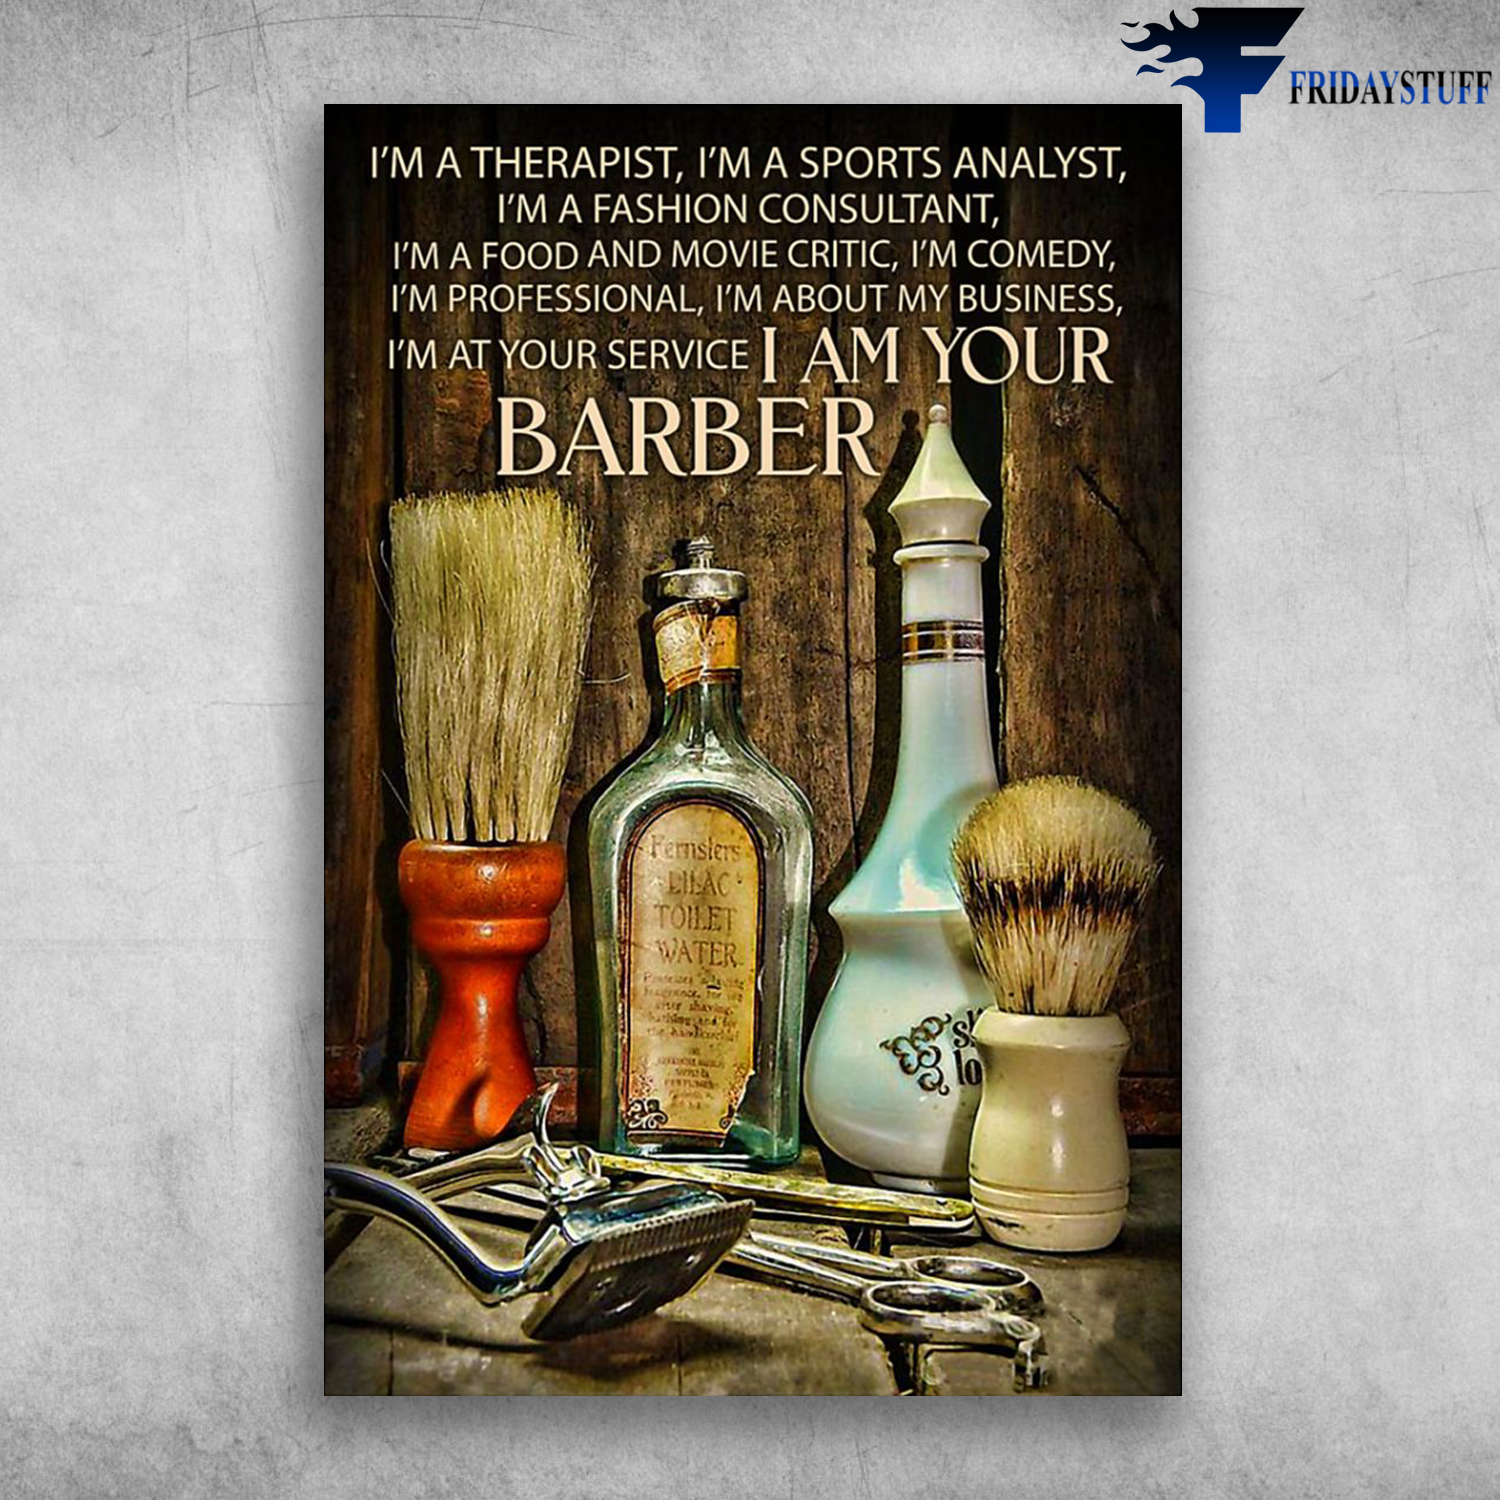 Tools Of The Barber - I'm A Therapist, I'm A Sports Analyst, I'm A Fashion Consultant, I'm A Food And Movie Critic, I'm Comedy, I'm Professional, I'm About My Business, I'm At Your Service, I'm Your Barber